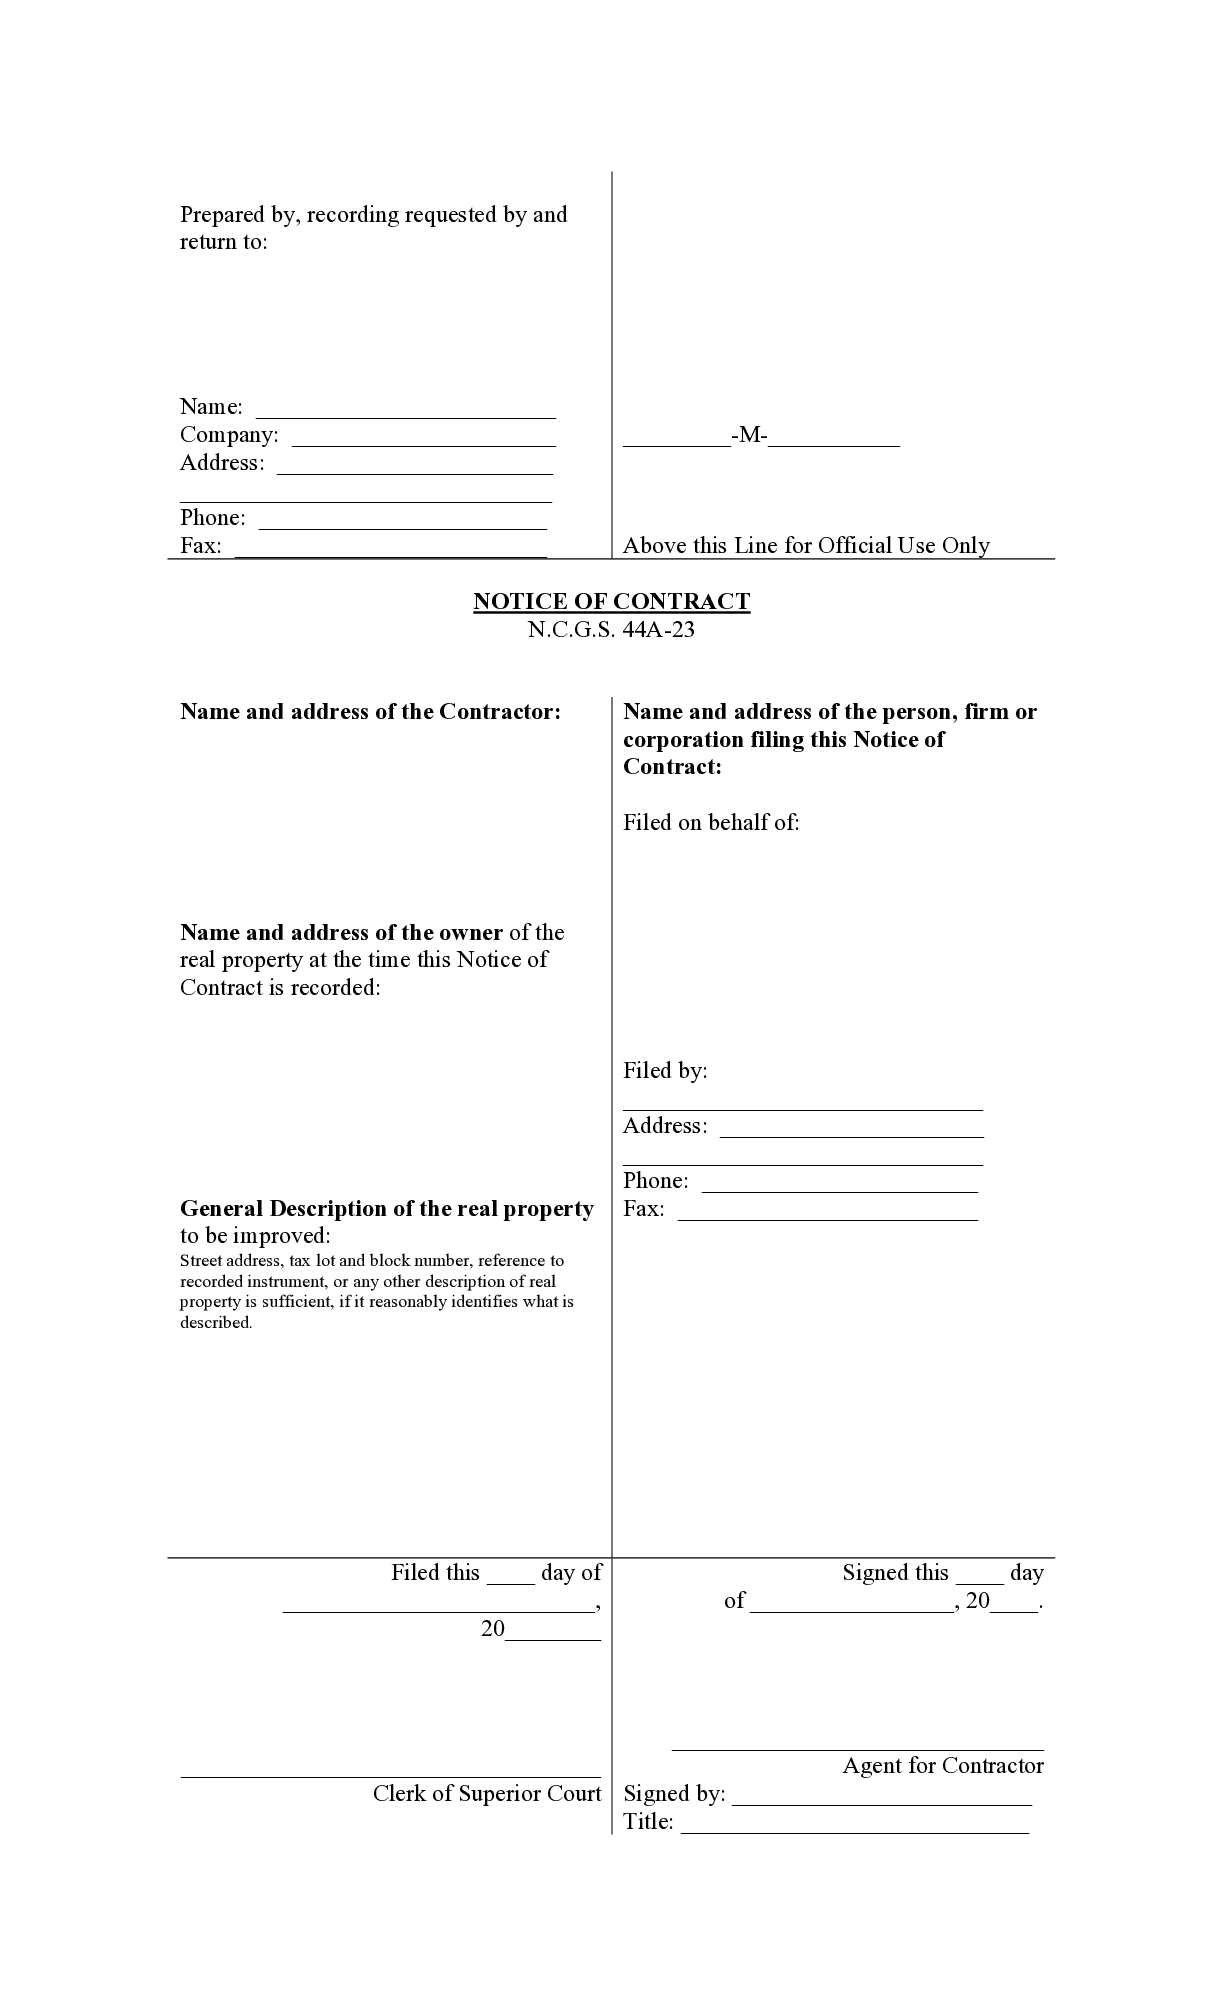 South Carolina Notice of Contract Form - free from